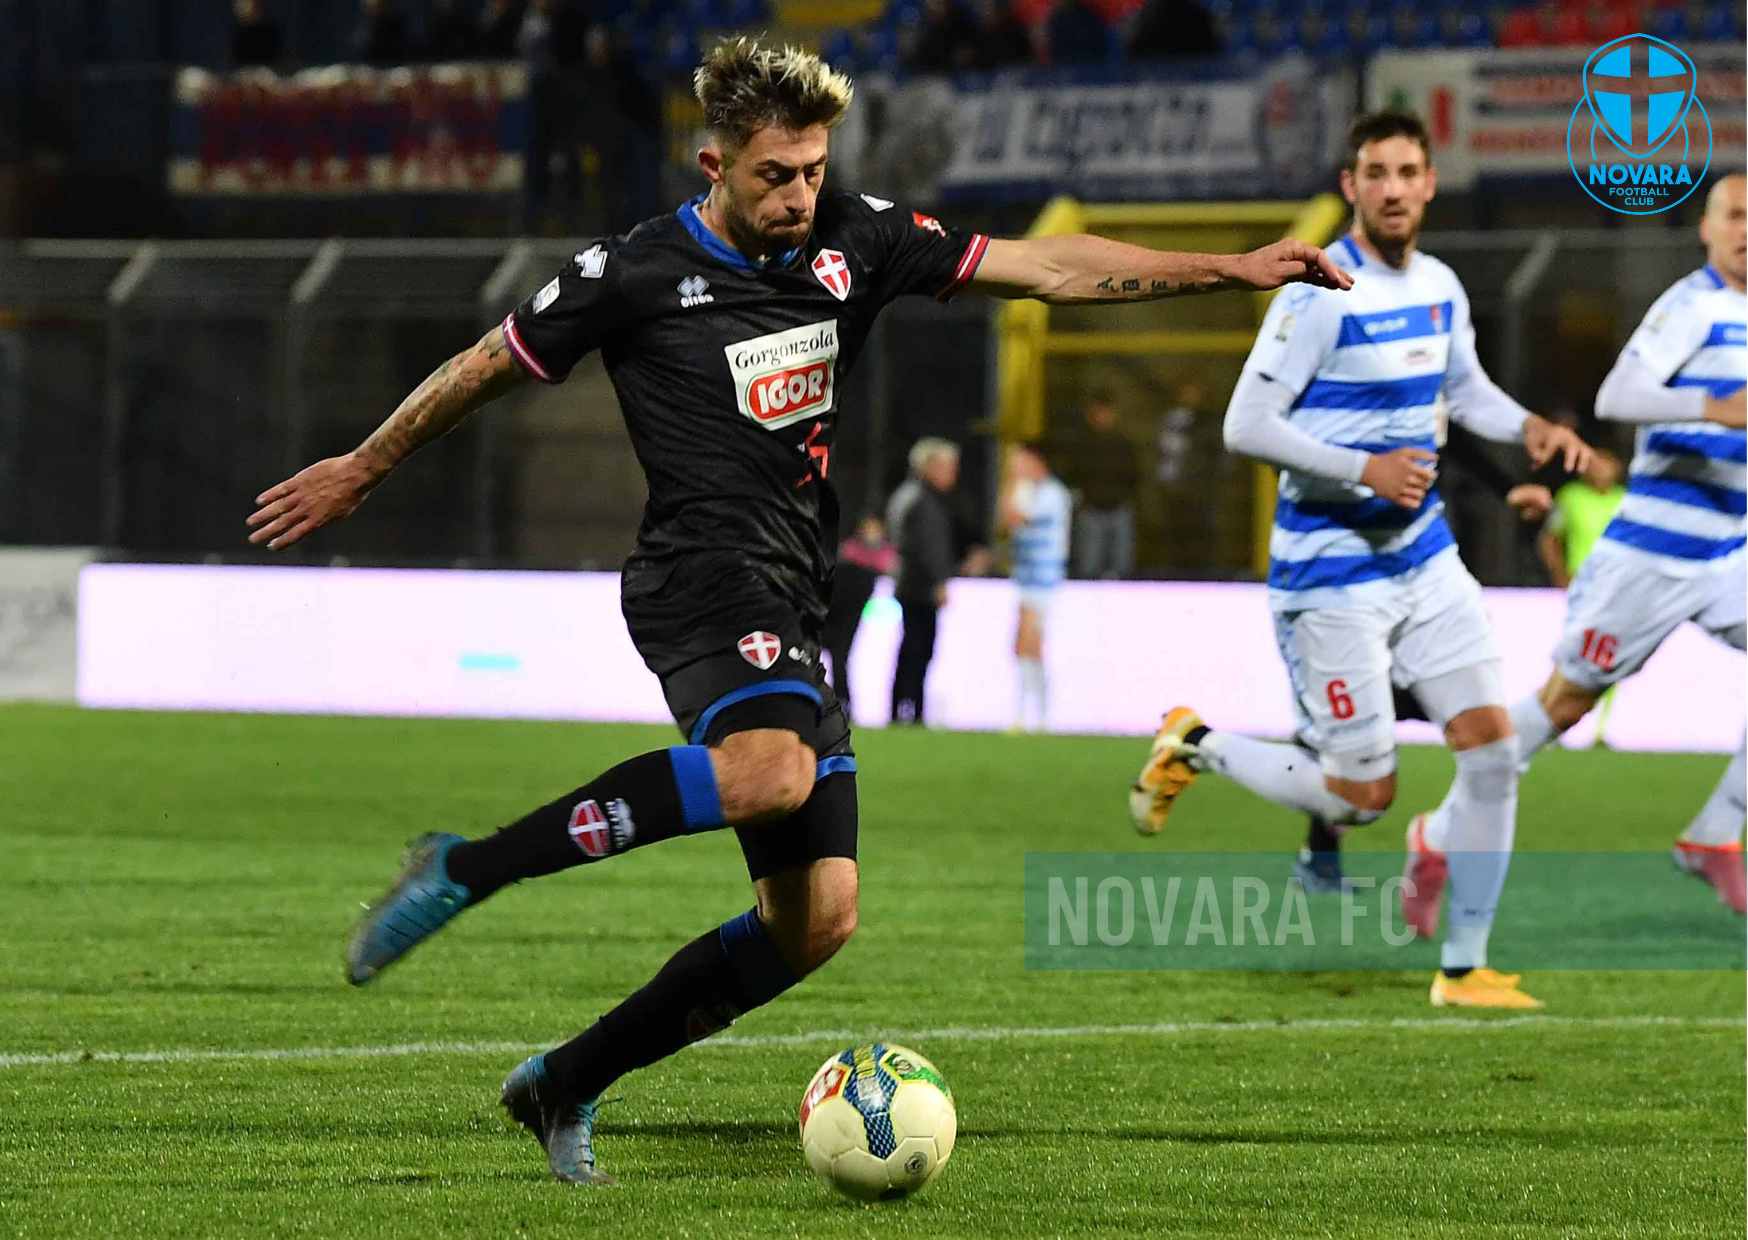 Read more about the article Pro Patria-Novara 1-1 | Gallery